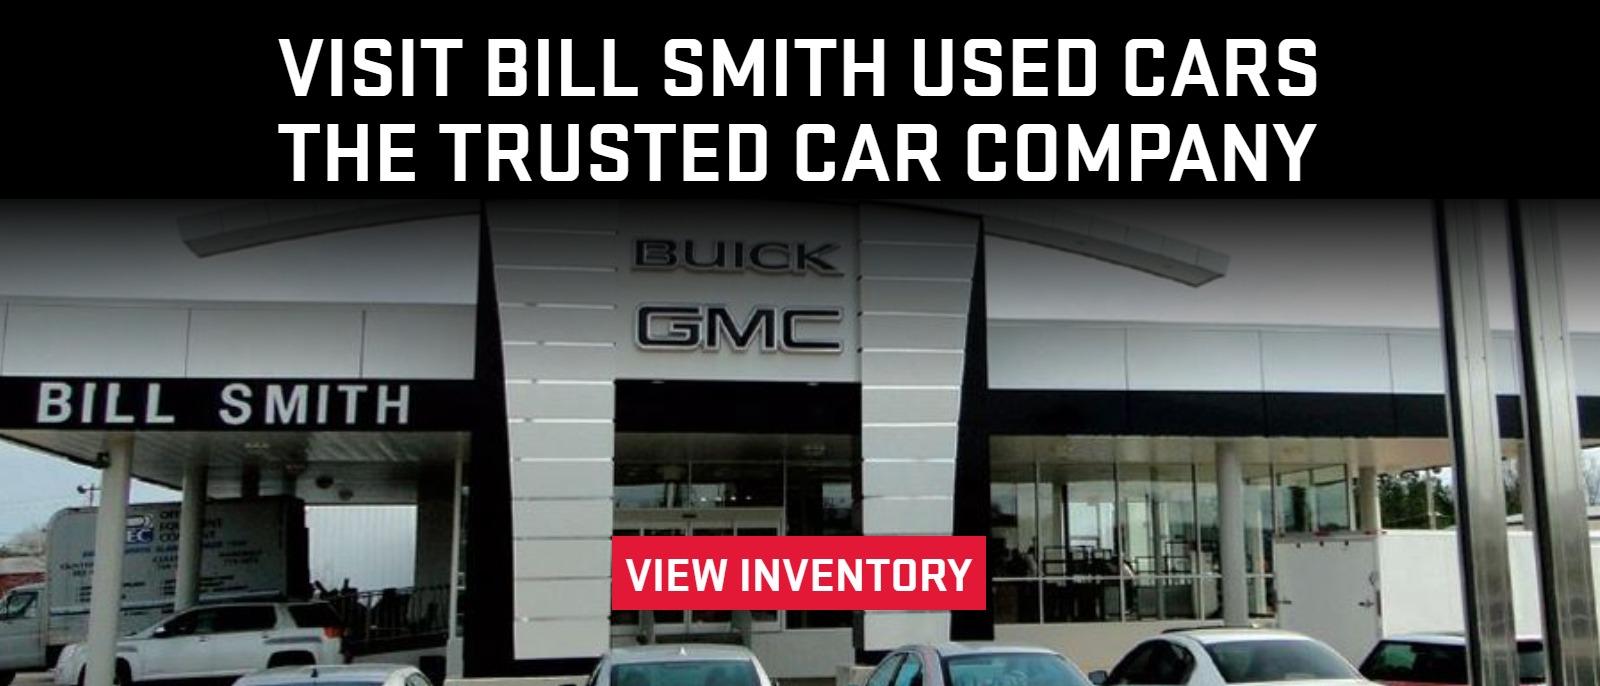 VISIT BILL SMITH USED CARS - THE TRUSTED CAR COMPANY